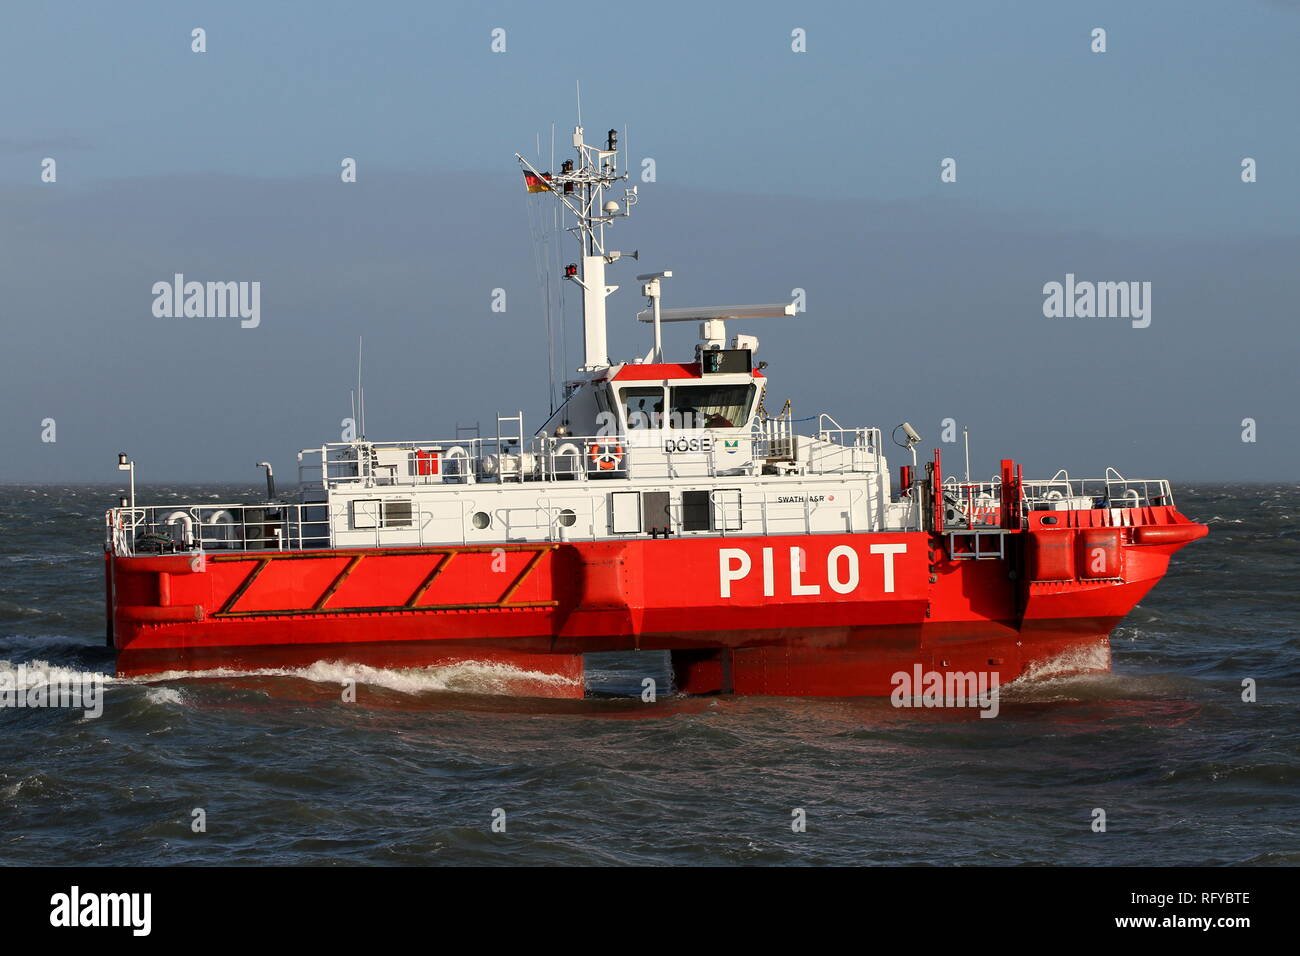 The pilot boat Döse reached on January 1, 2019 the port of Cuxhaven coming from the North Sea. Stock Photo